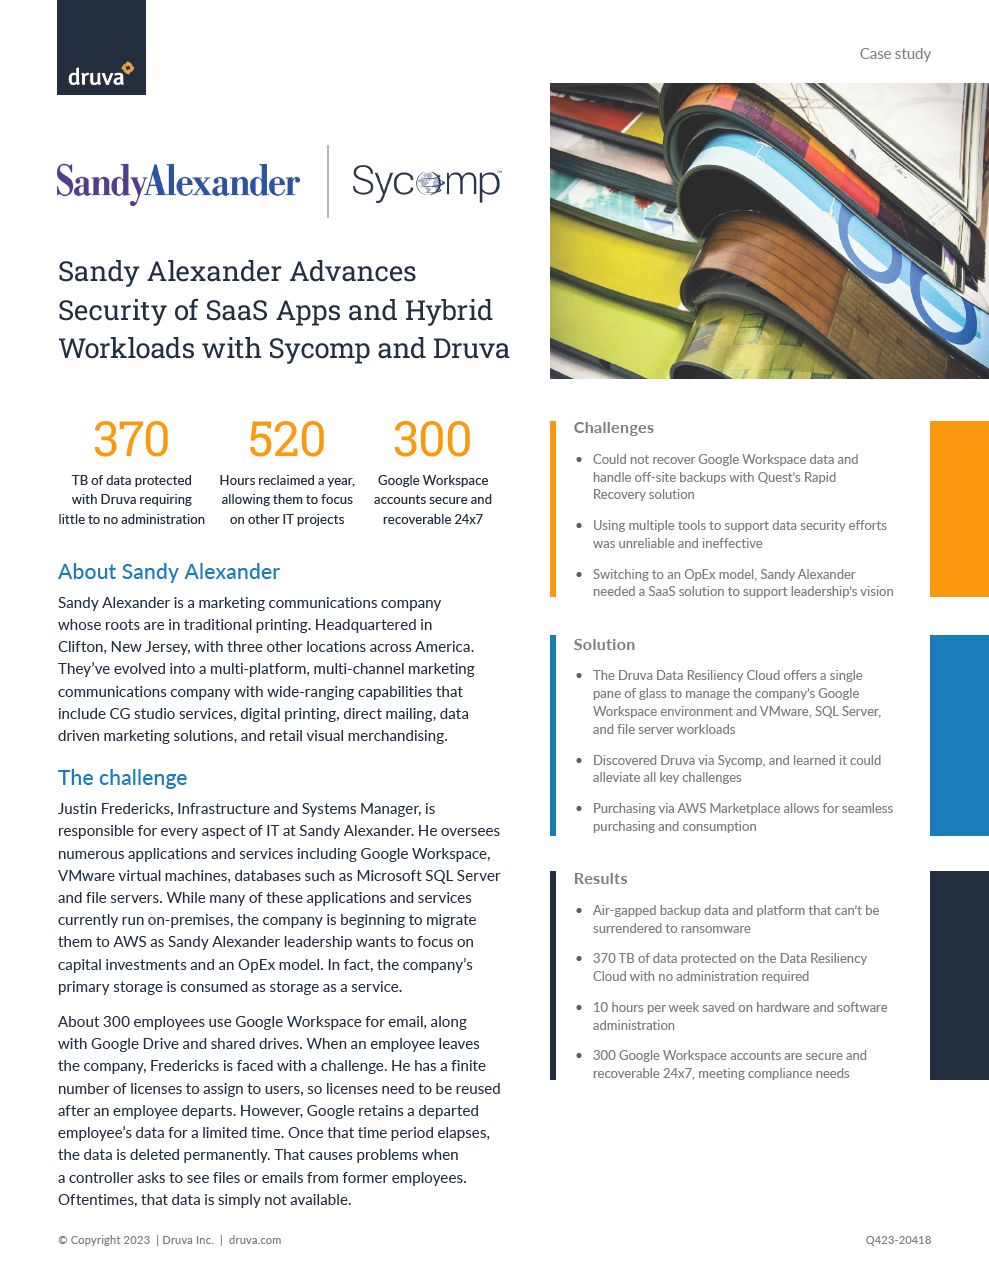 Sandy Alexander Advances Security of SaaS Apps and Hybrid Workloads with Sycomp and Druva